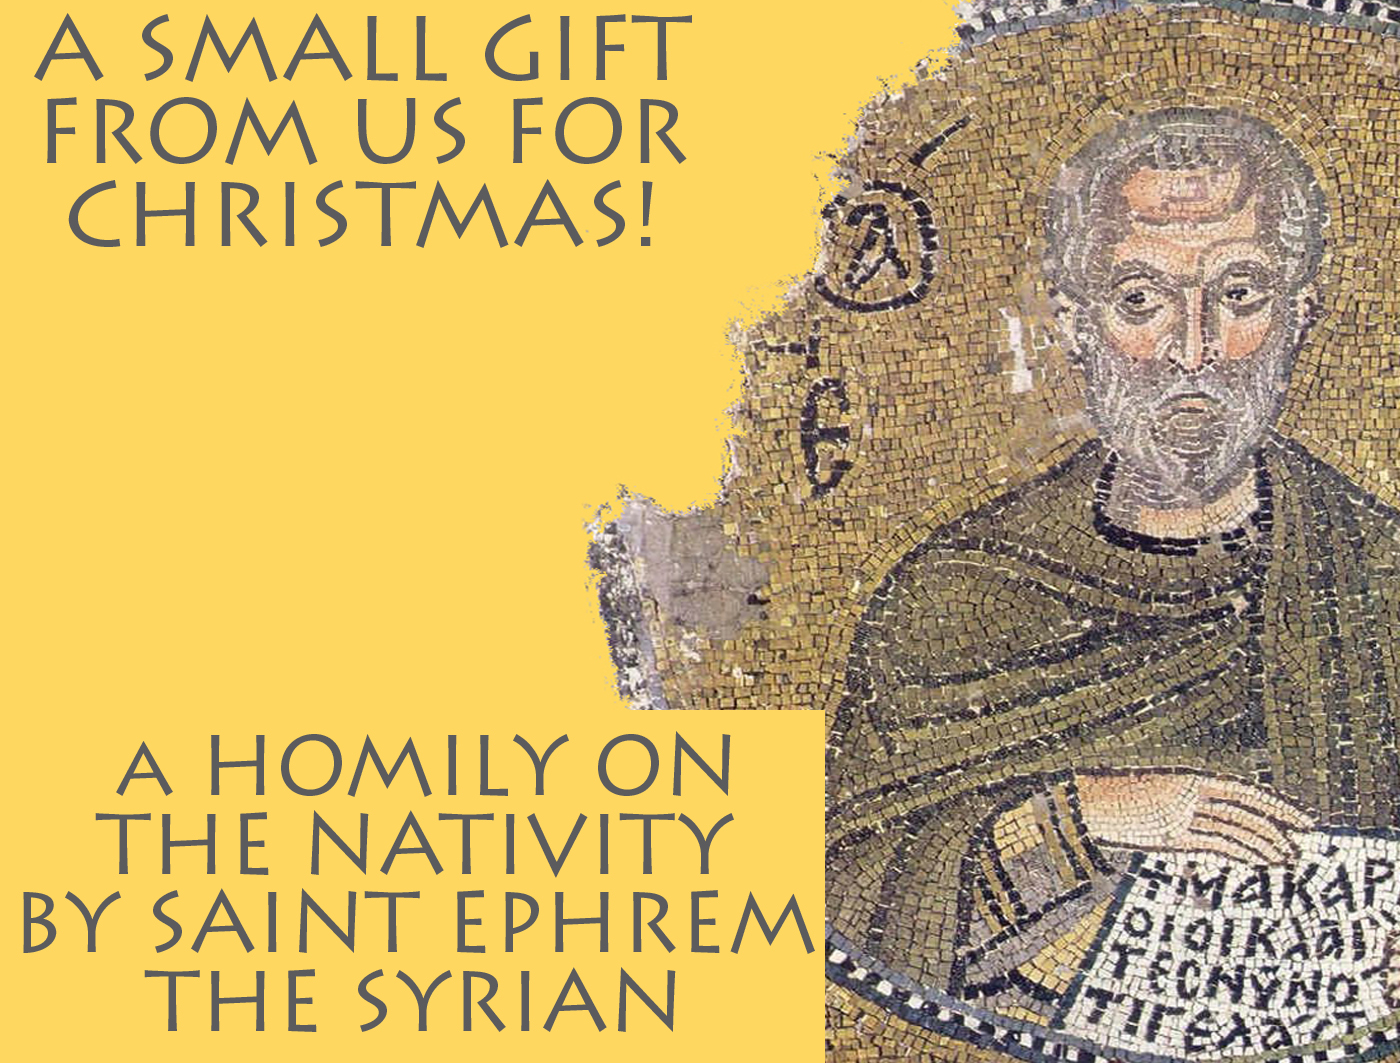 A Homily on Nativity by St Ephrem the Syrian's image